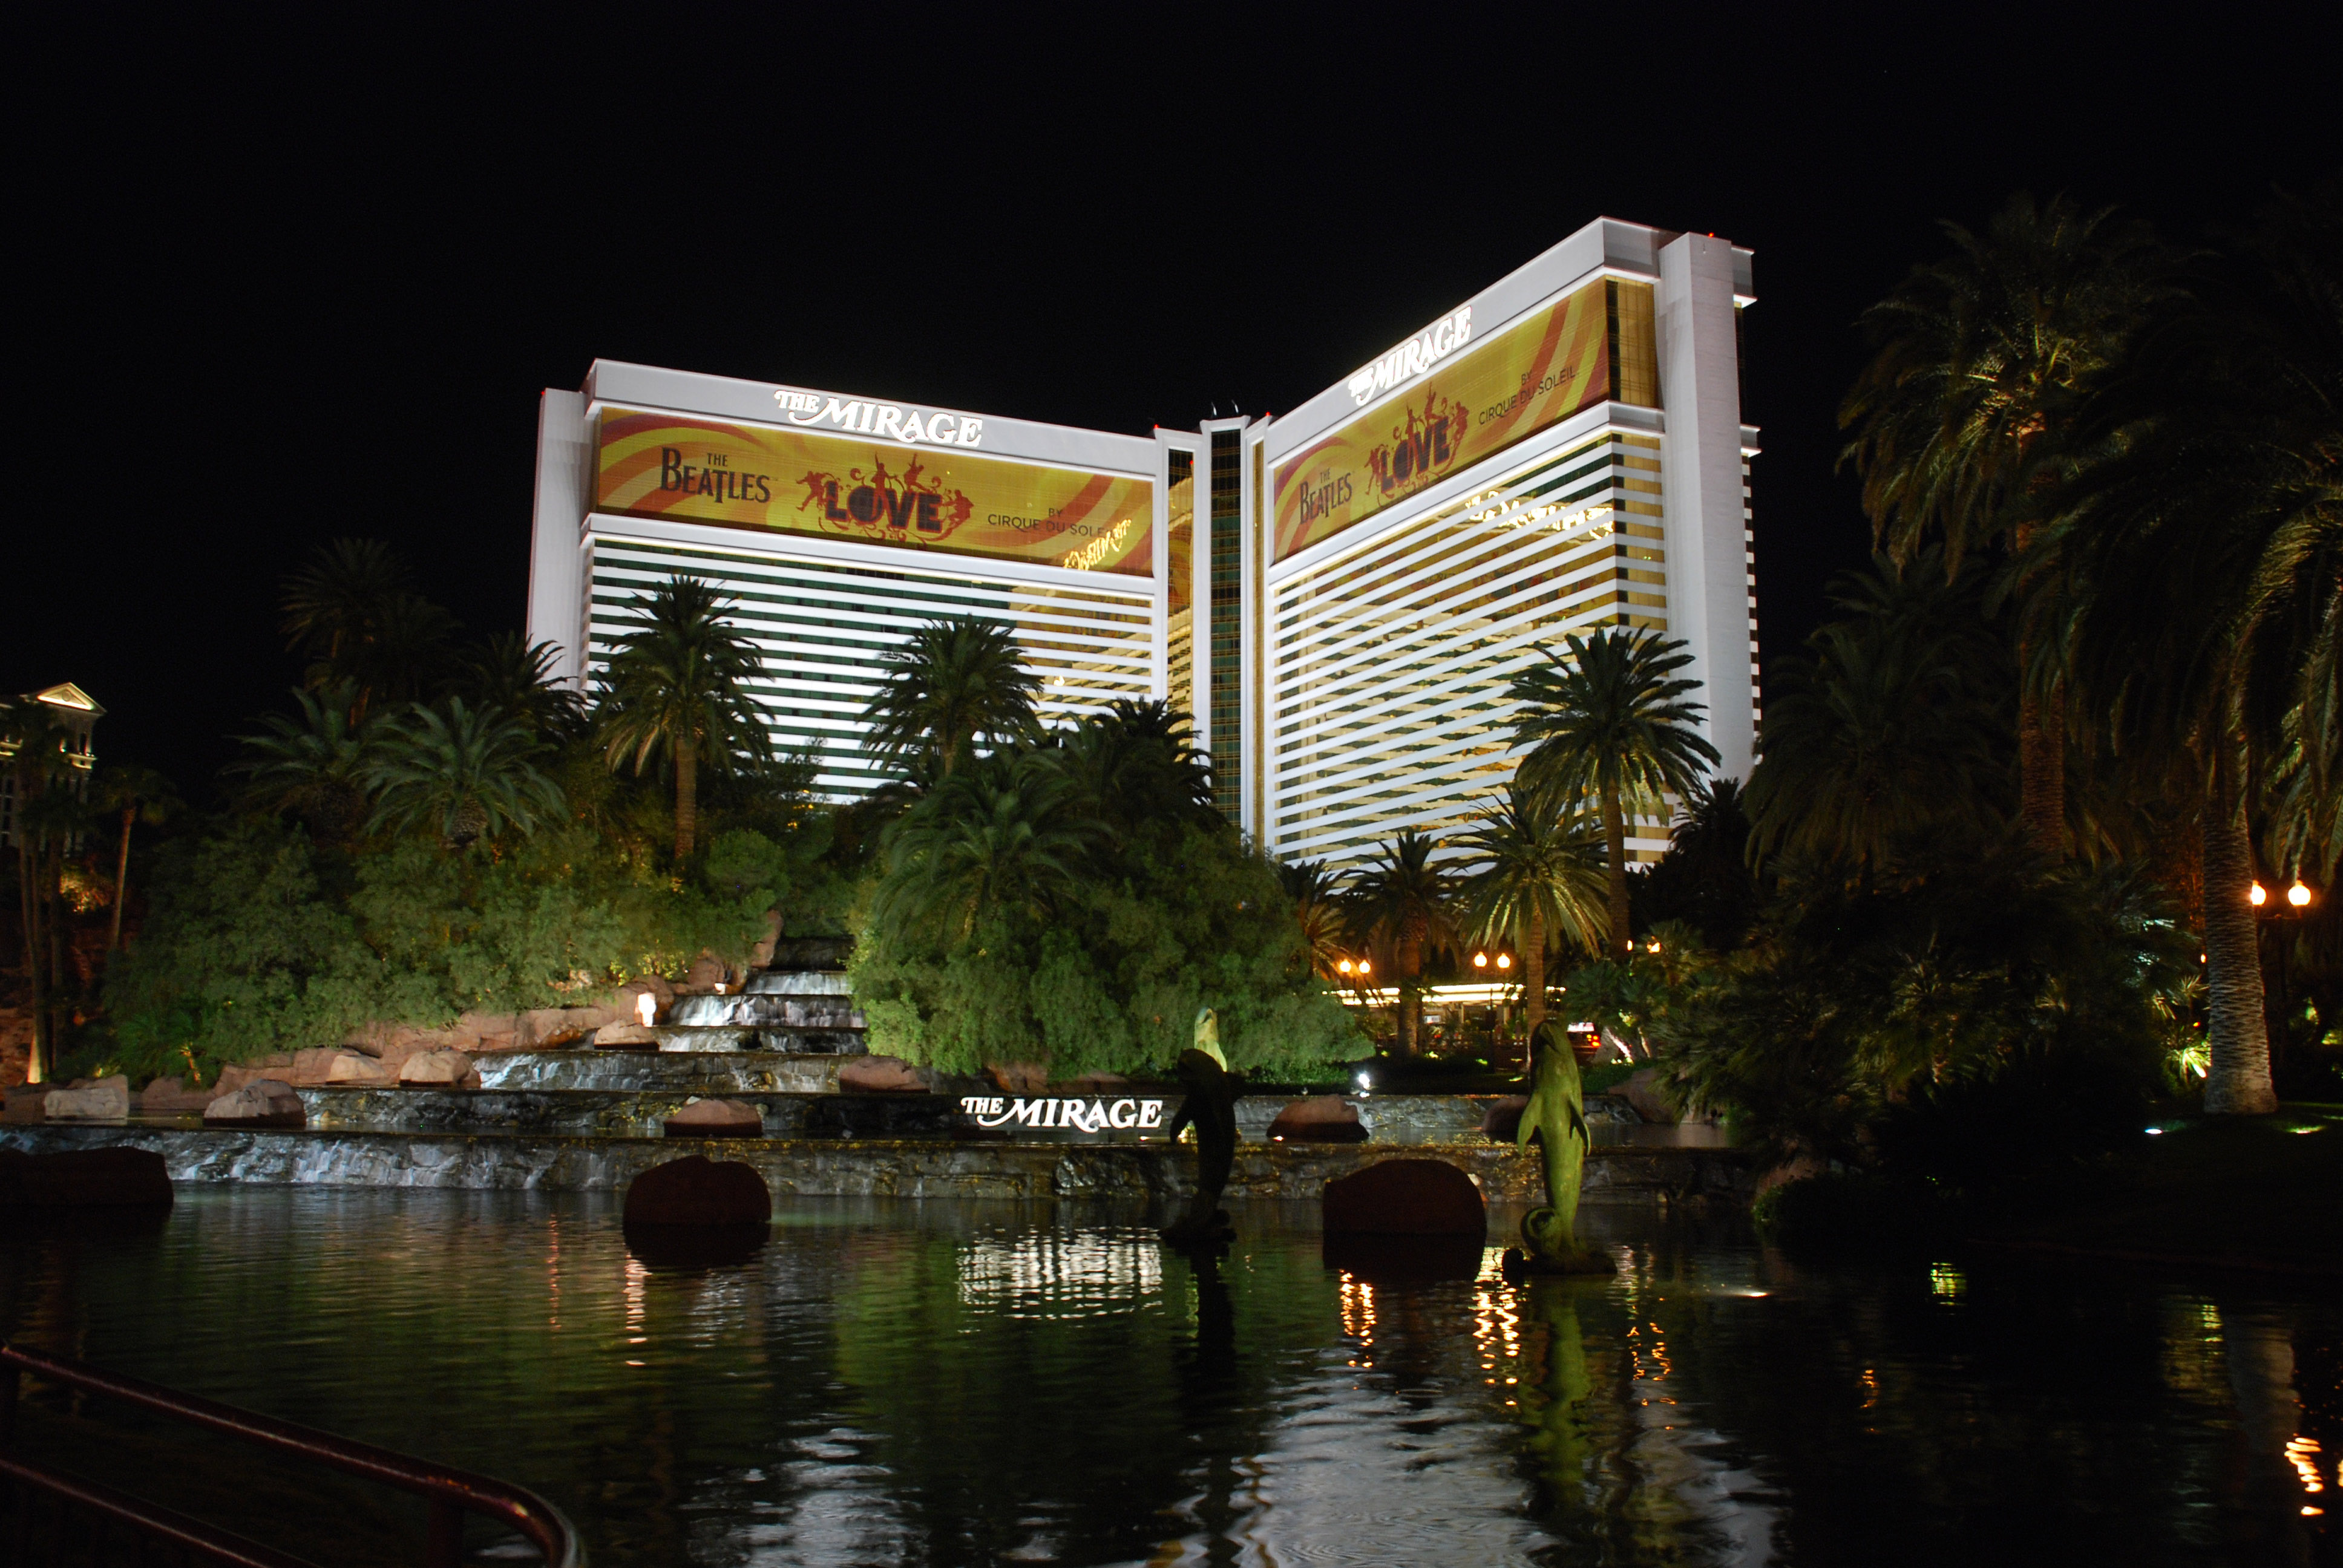 The Mirage Hotel At Night Travel Wallpaper And Stock Photo